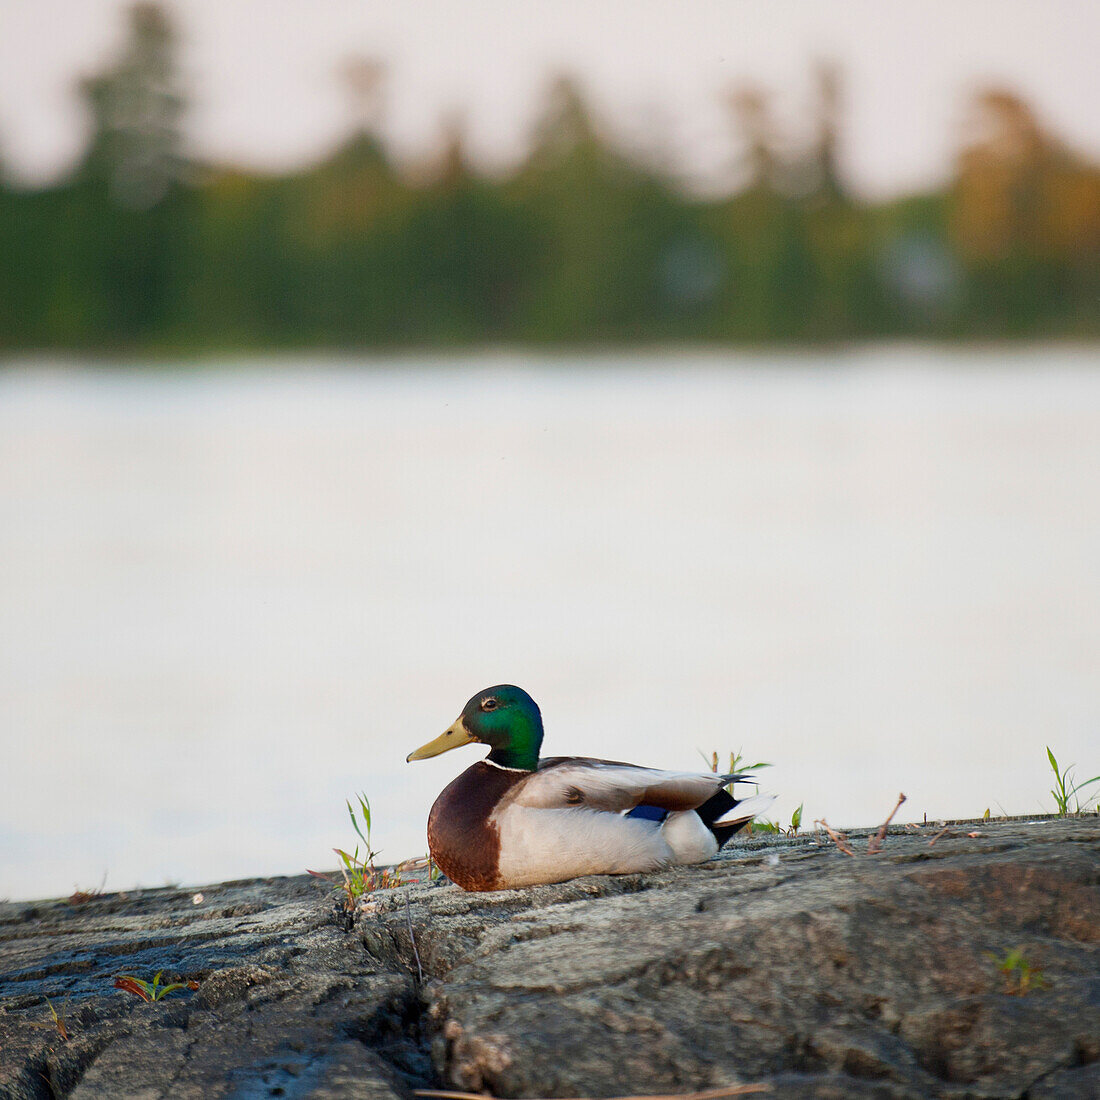 'Duck Sitting On A Rock At The Water's Edge; Lake Of The Woods, Ontario, Canada'